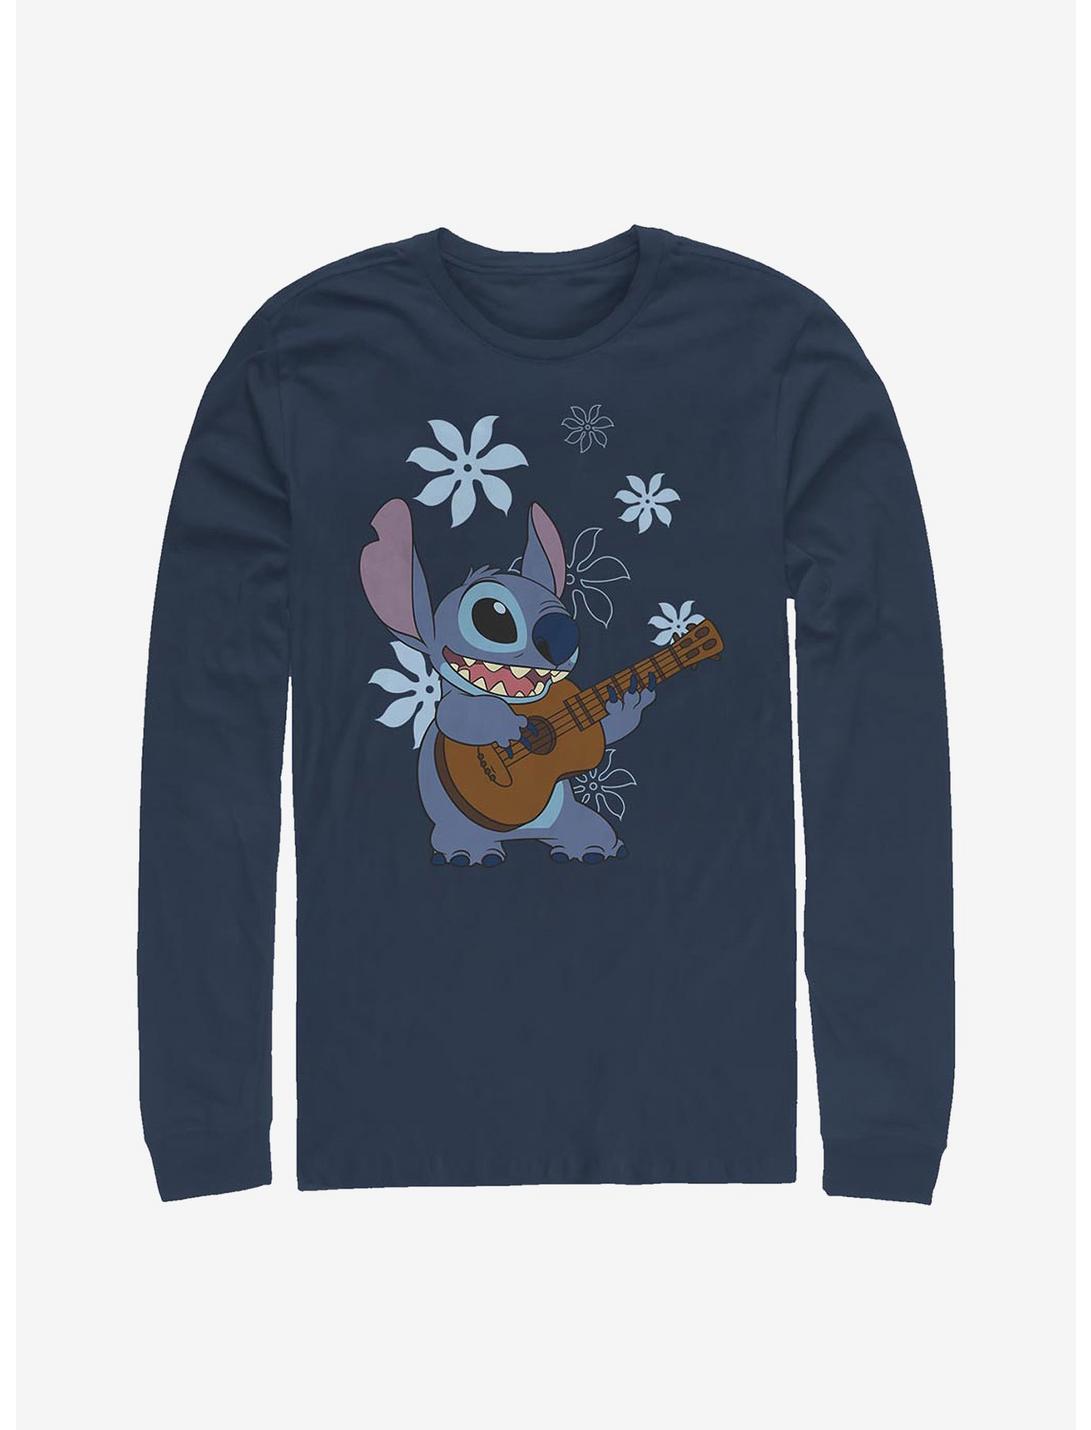 Disney Lilo And Stitch Flowers Long-Sleeve T-Shirt, NAVY, hi-res